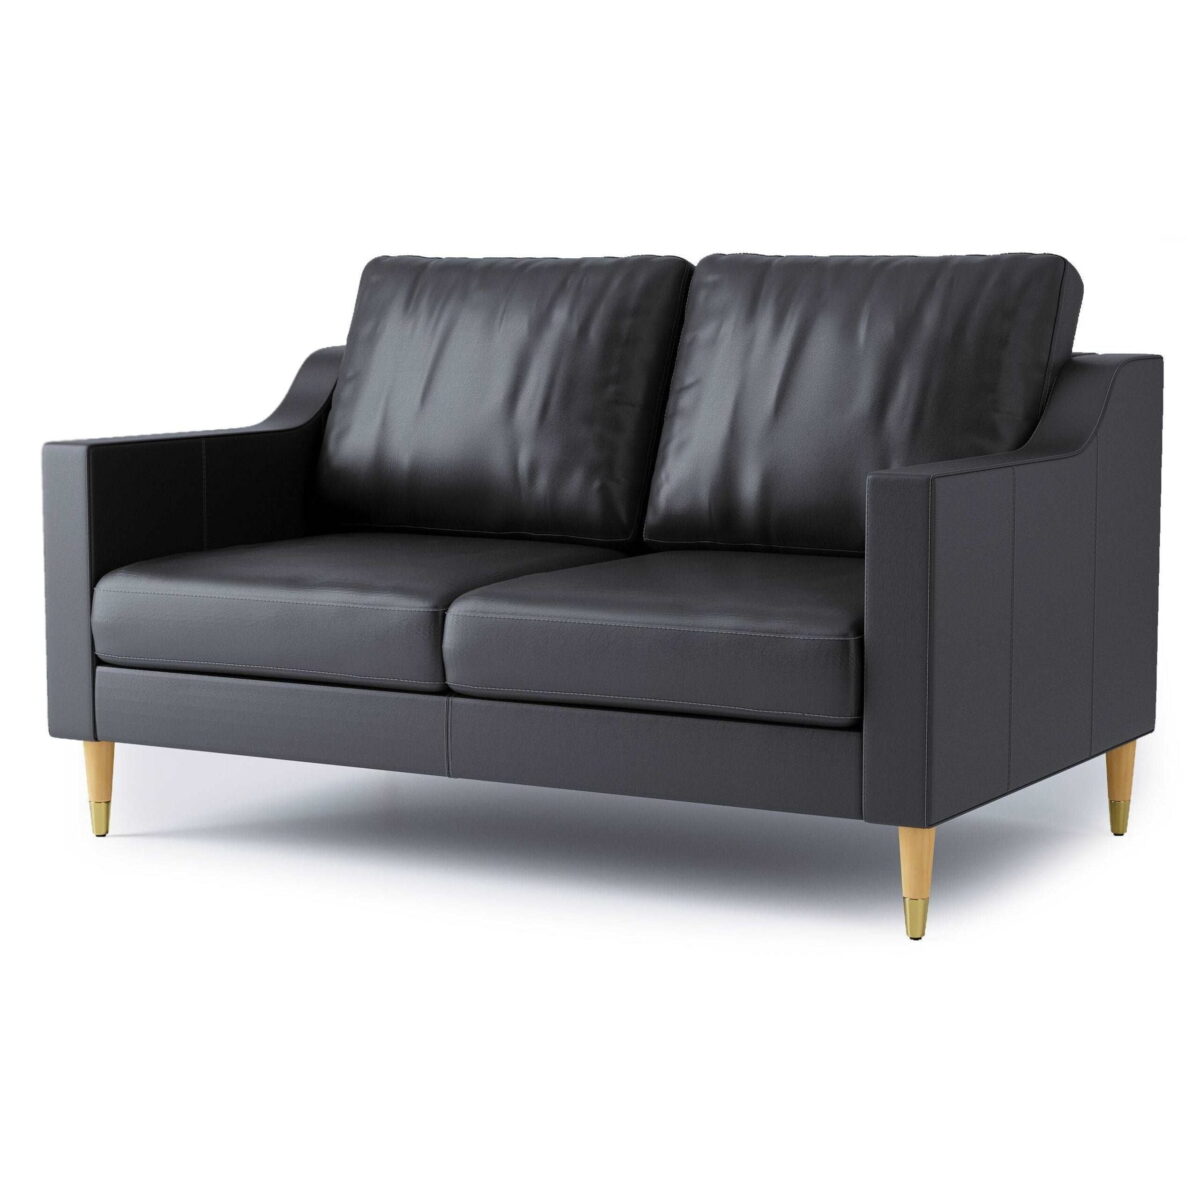 Classic Elegance: Timeless Loveseat for Refined Spaces